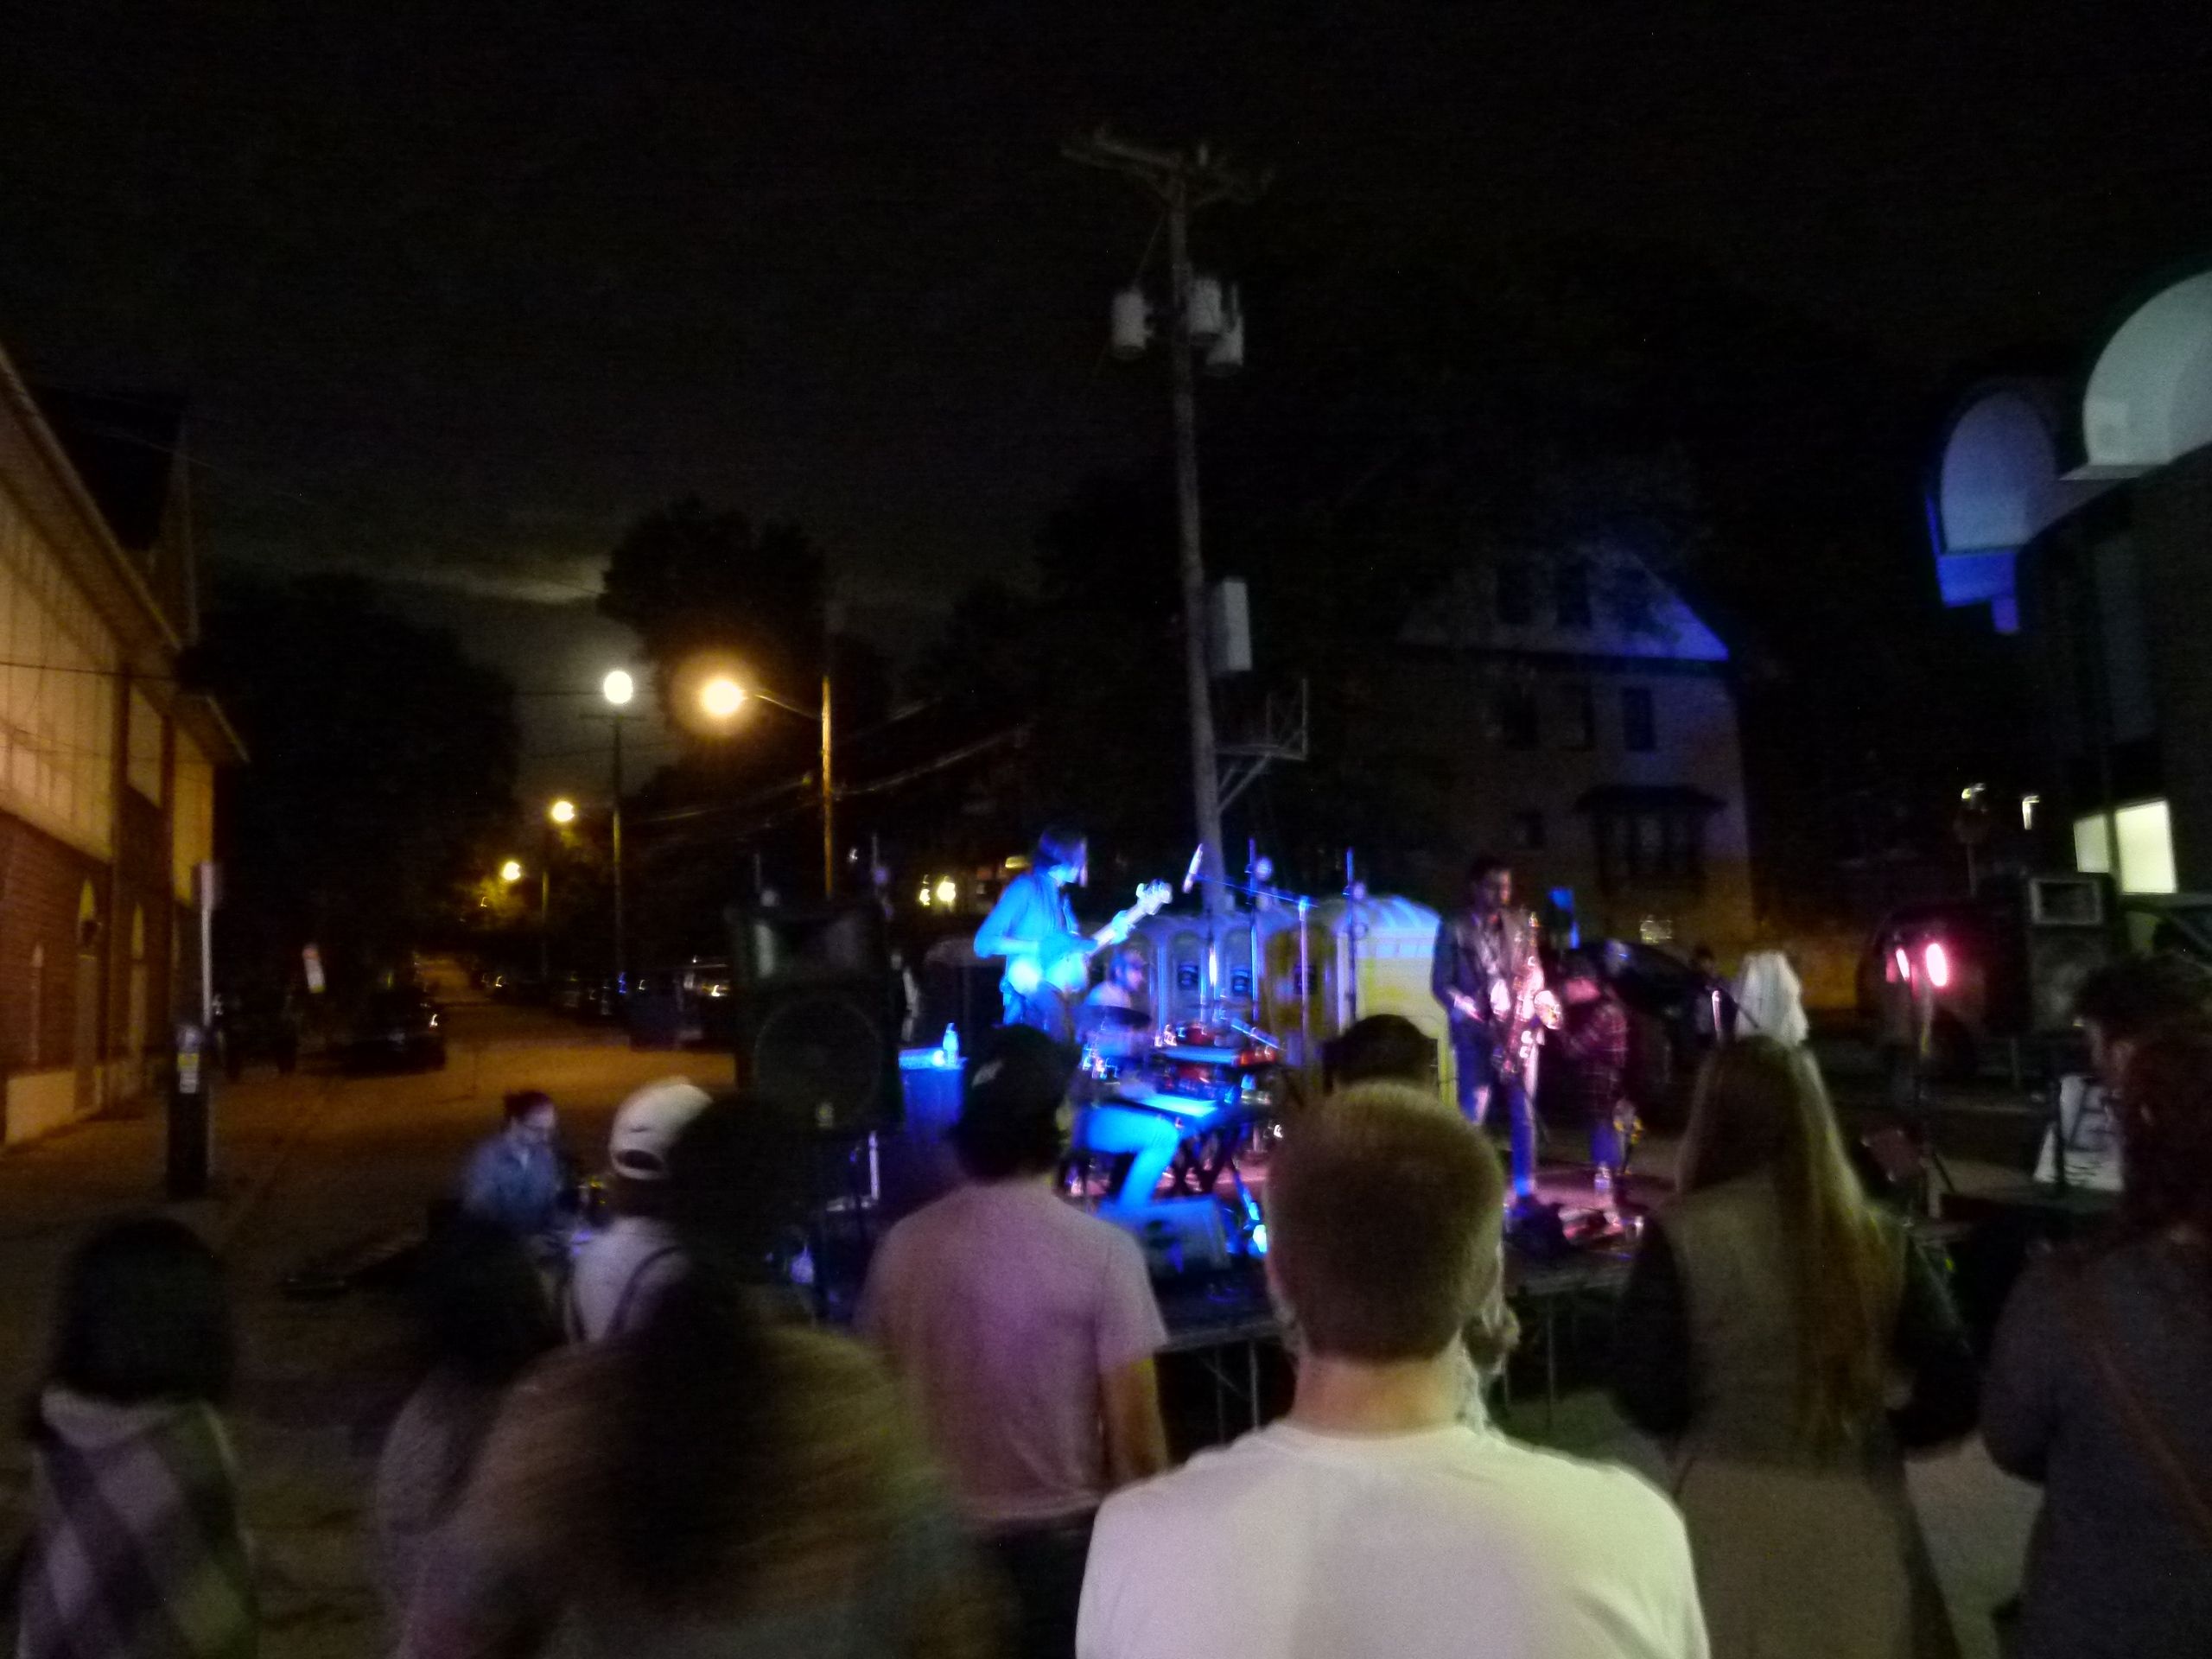 East End Mile, an innovative jazz group, performs as the moon rises in the background.